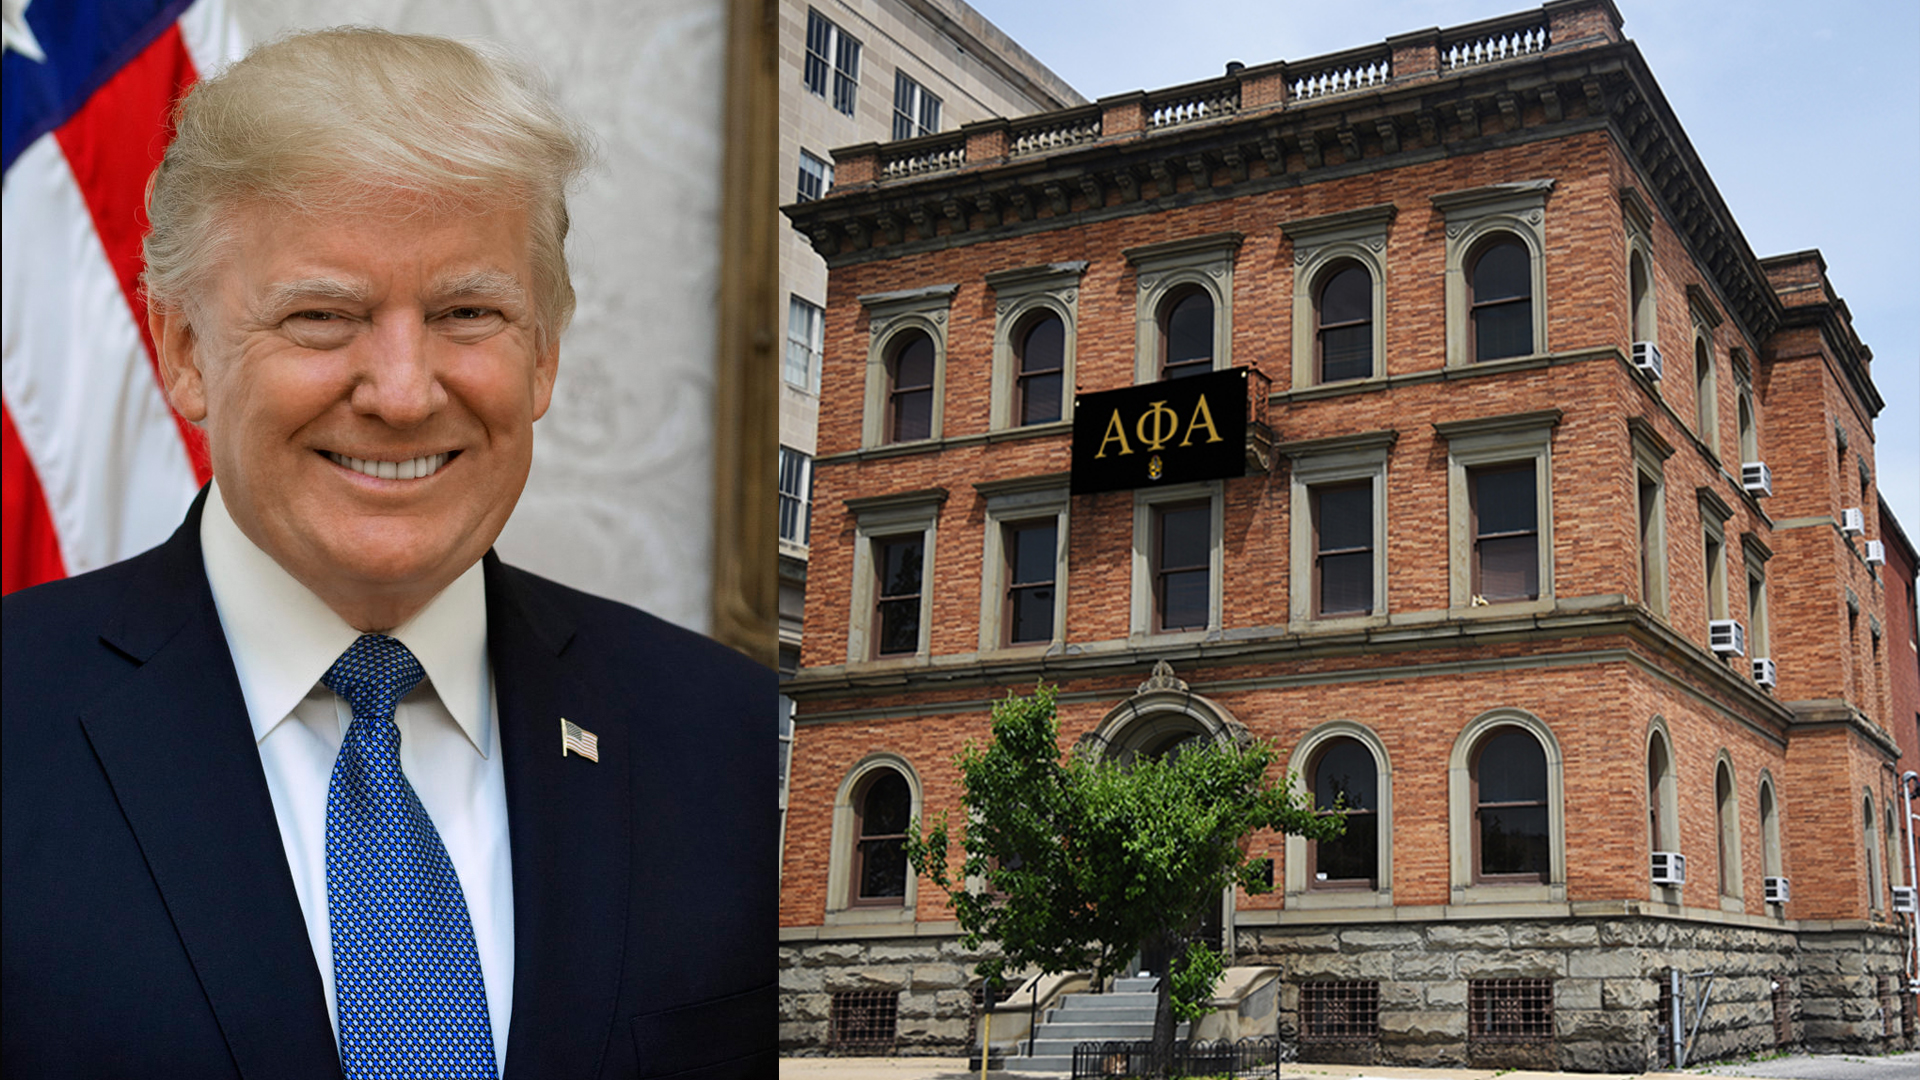 Alpha Phi Alpha Creates Petition Calling for Trump to Be Removed From